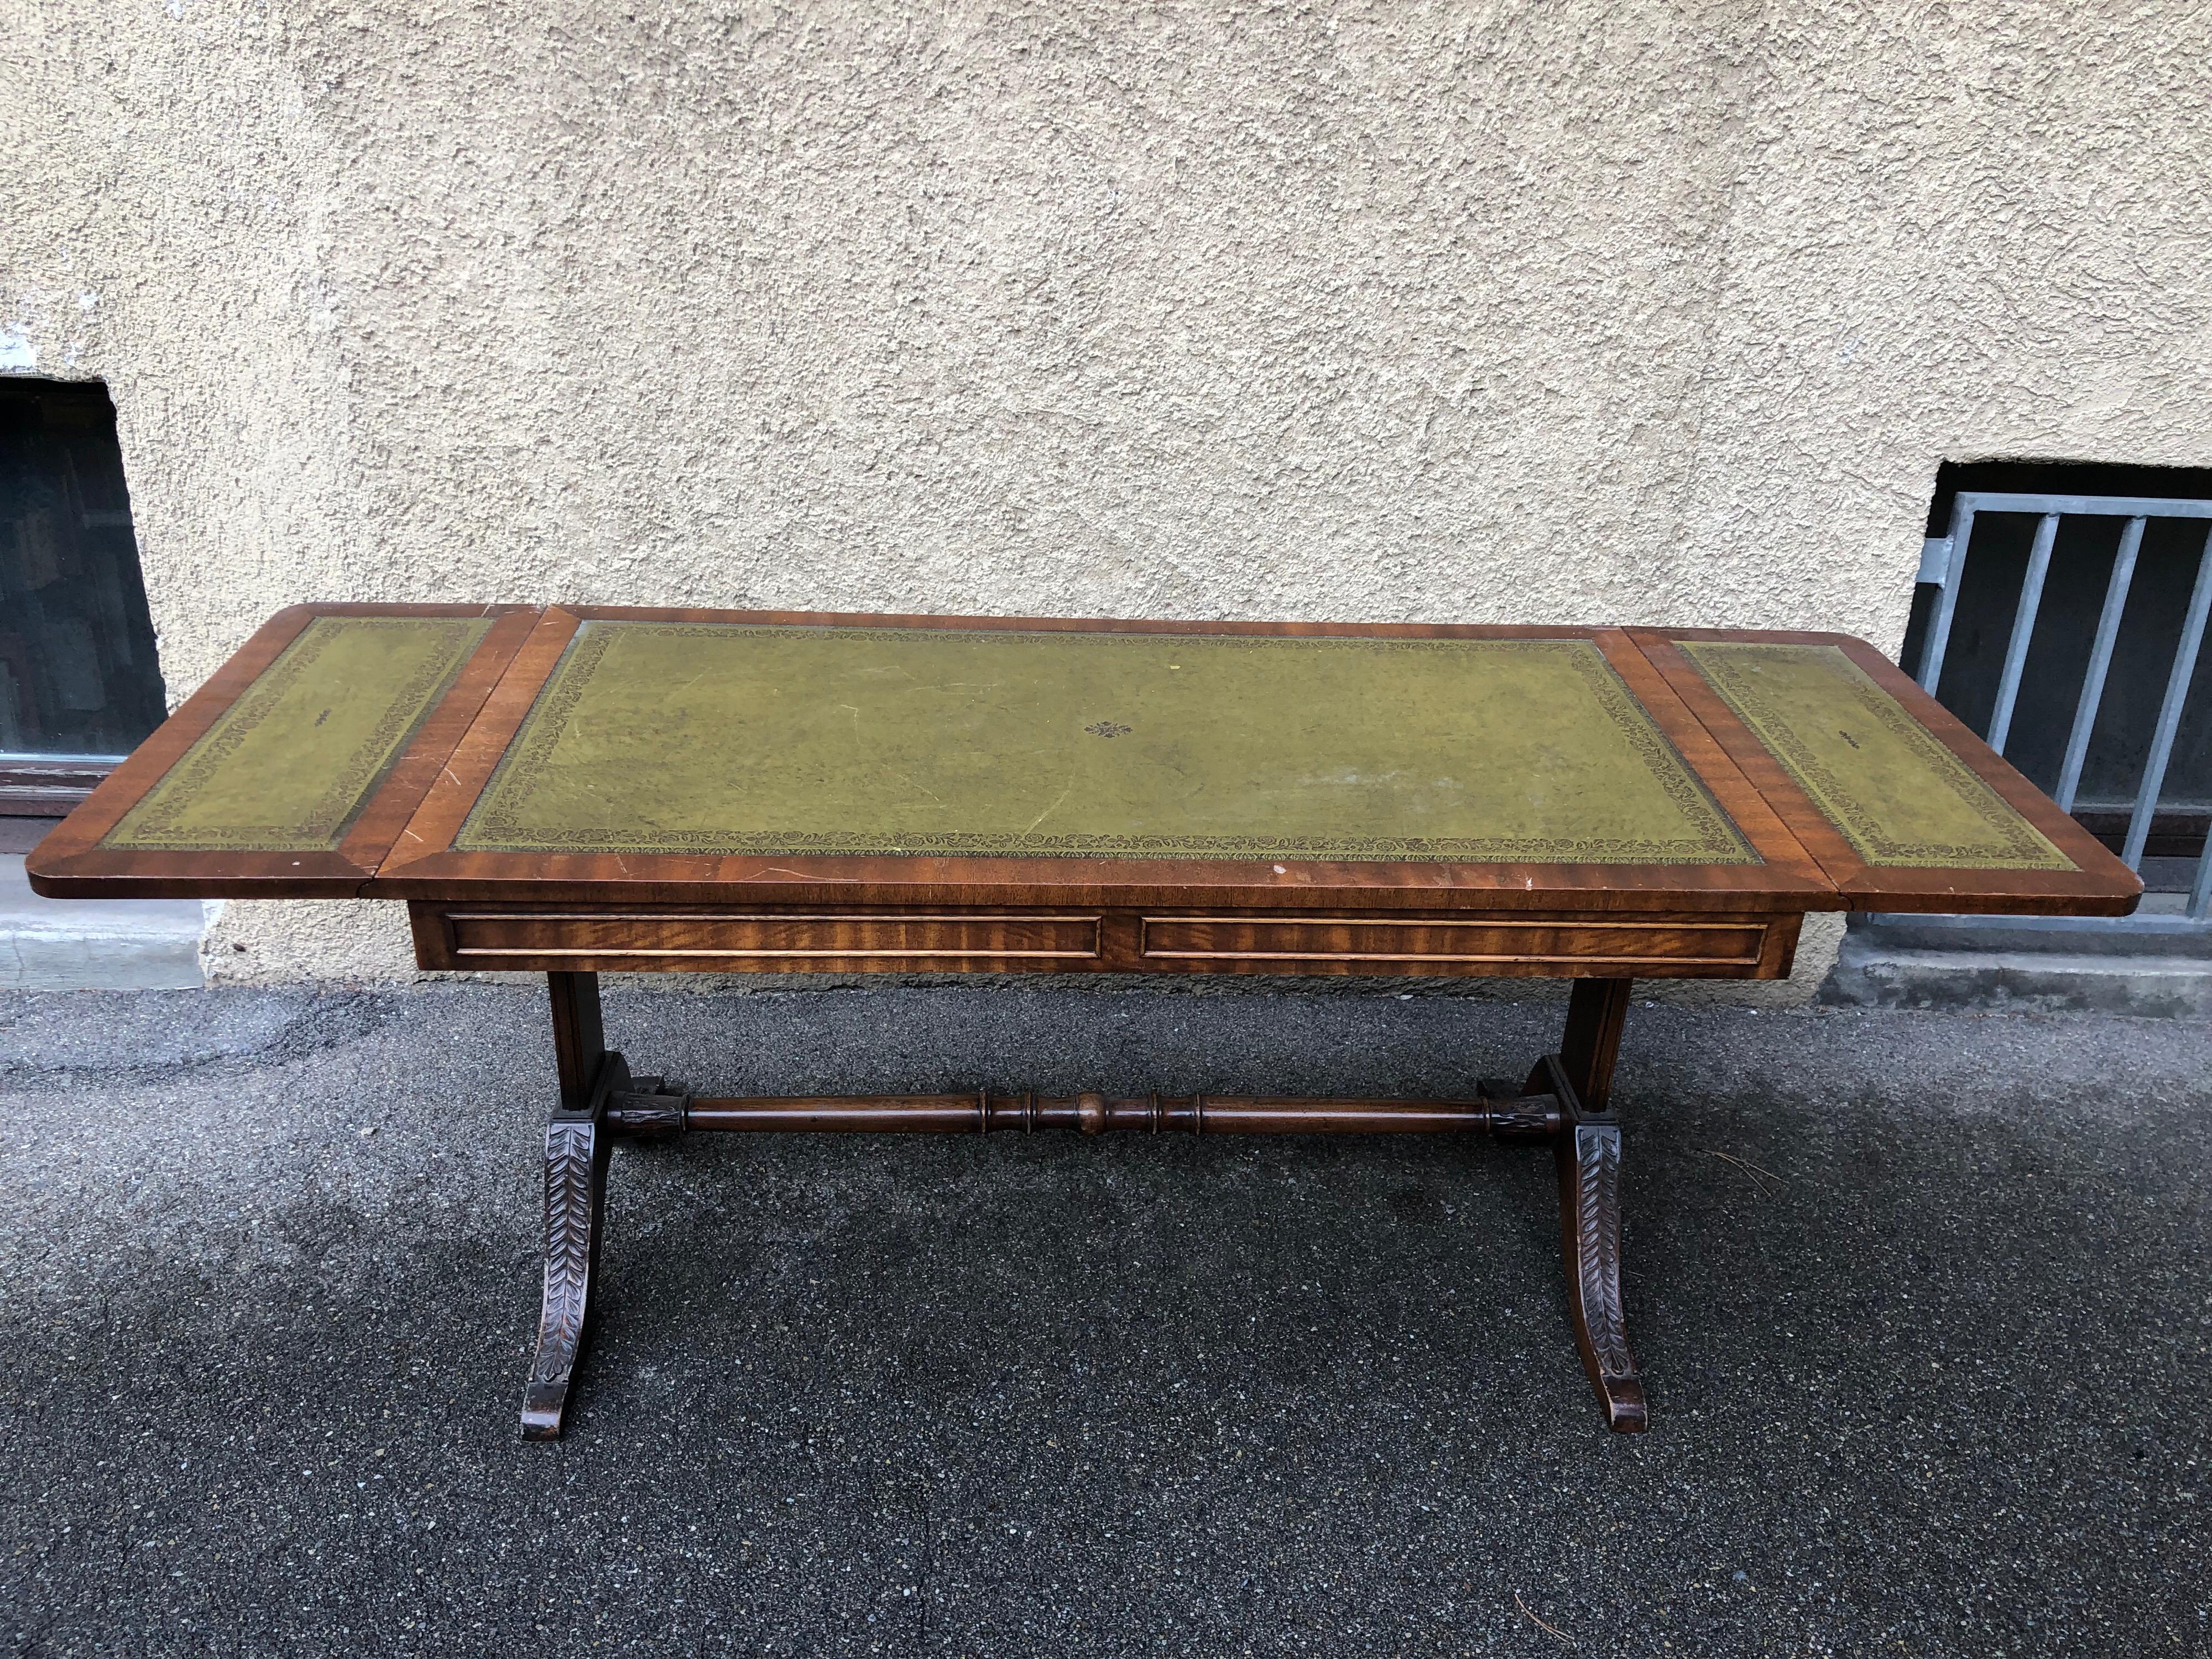 Elegant coffee table in good condition with beautiful leather top , foldable sides and carved details. This table was made circa 1940.

For lower shipping prices, we ship it disassembled.

The Regency in the United Kingdom of Great Britain and